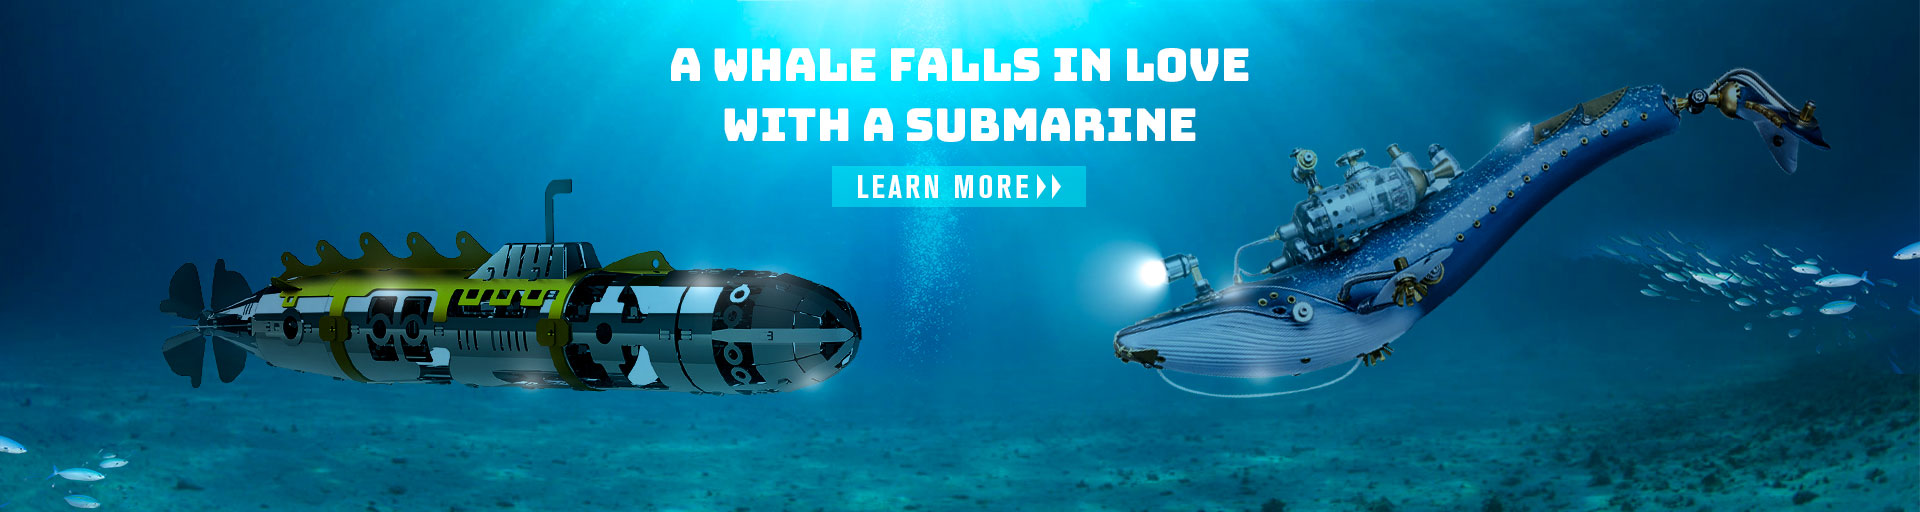 A Whale Falls in Love with A Submarine